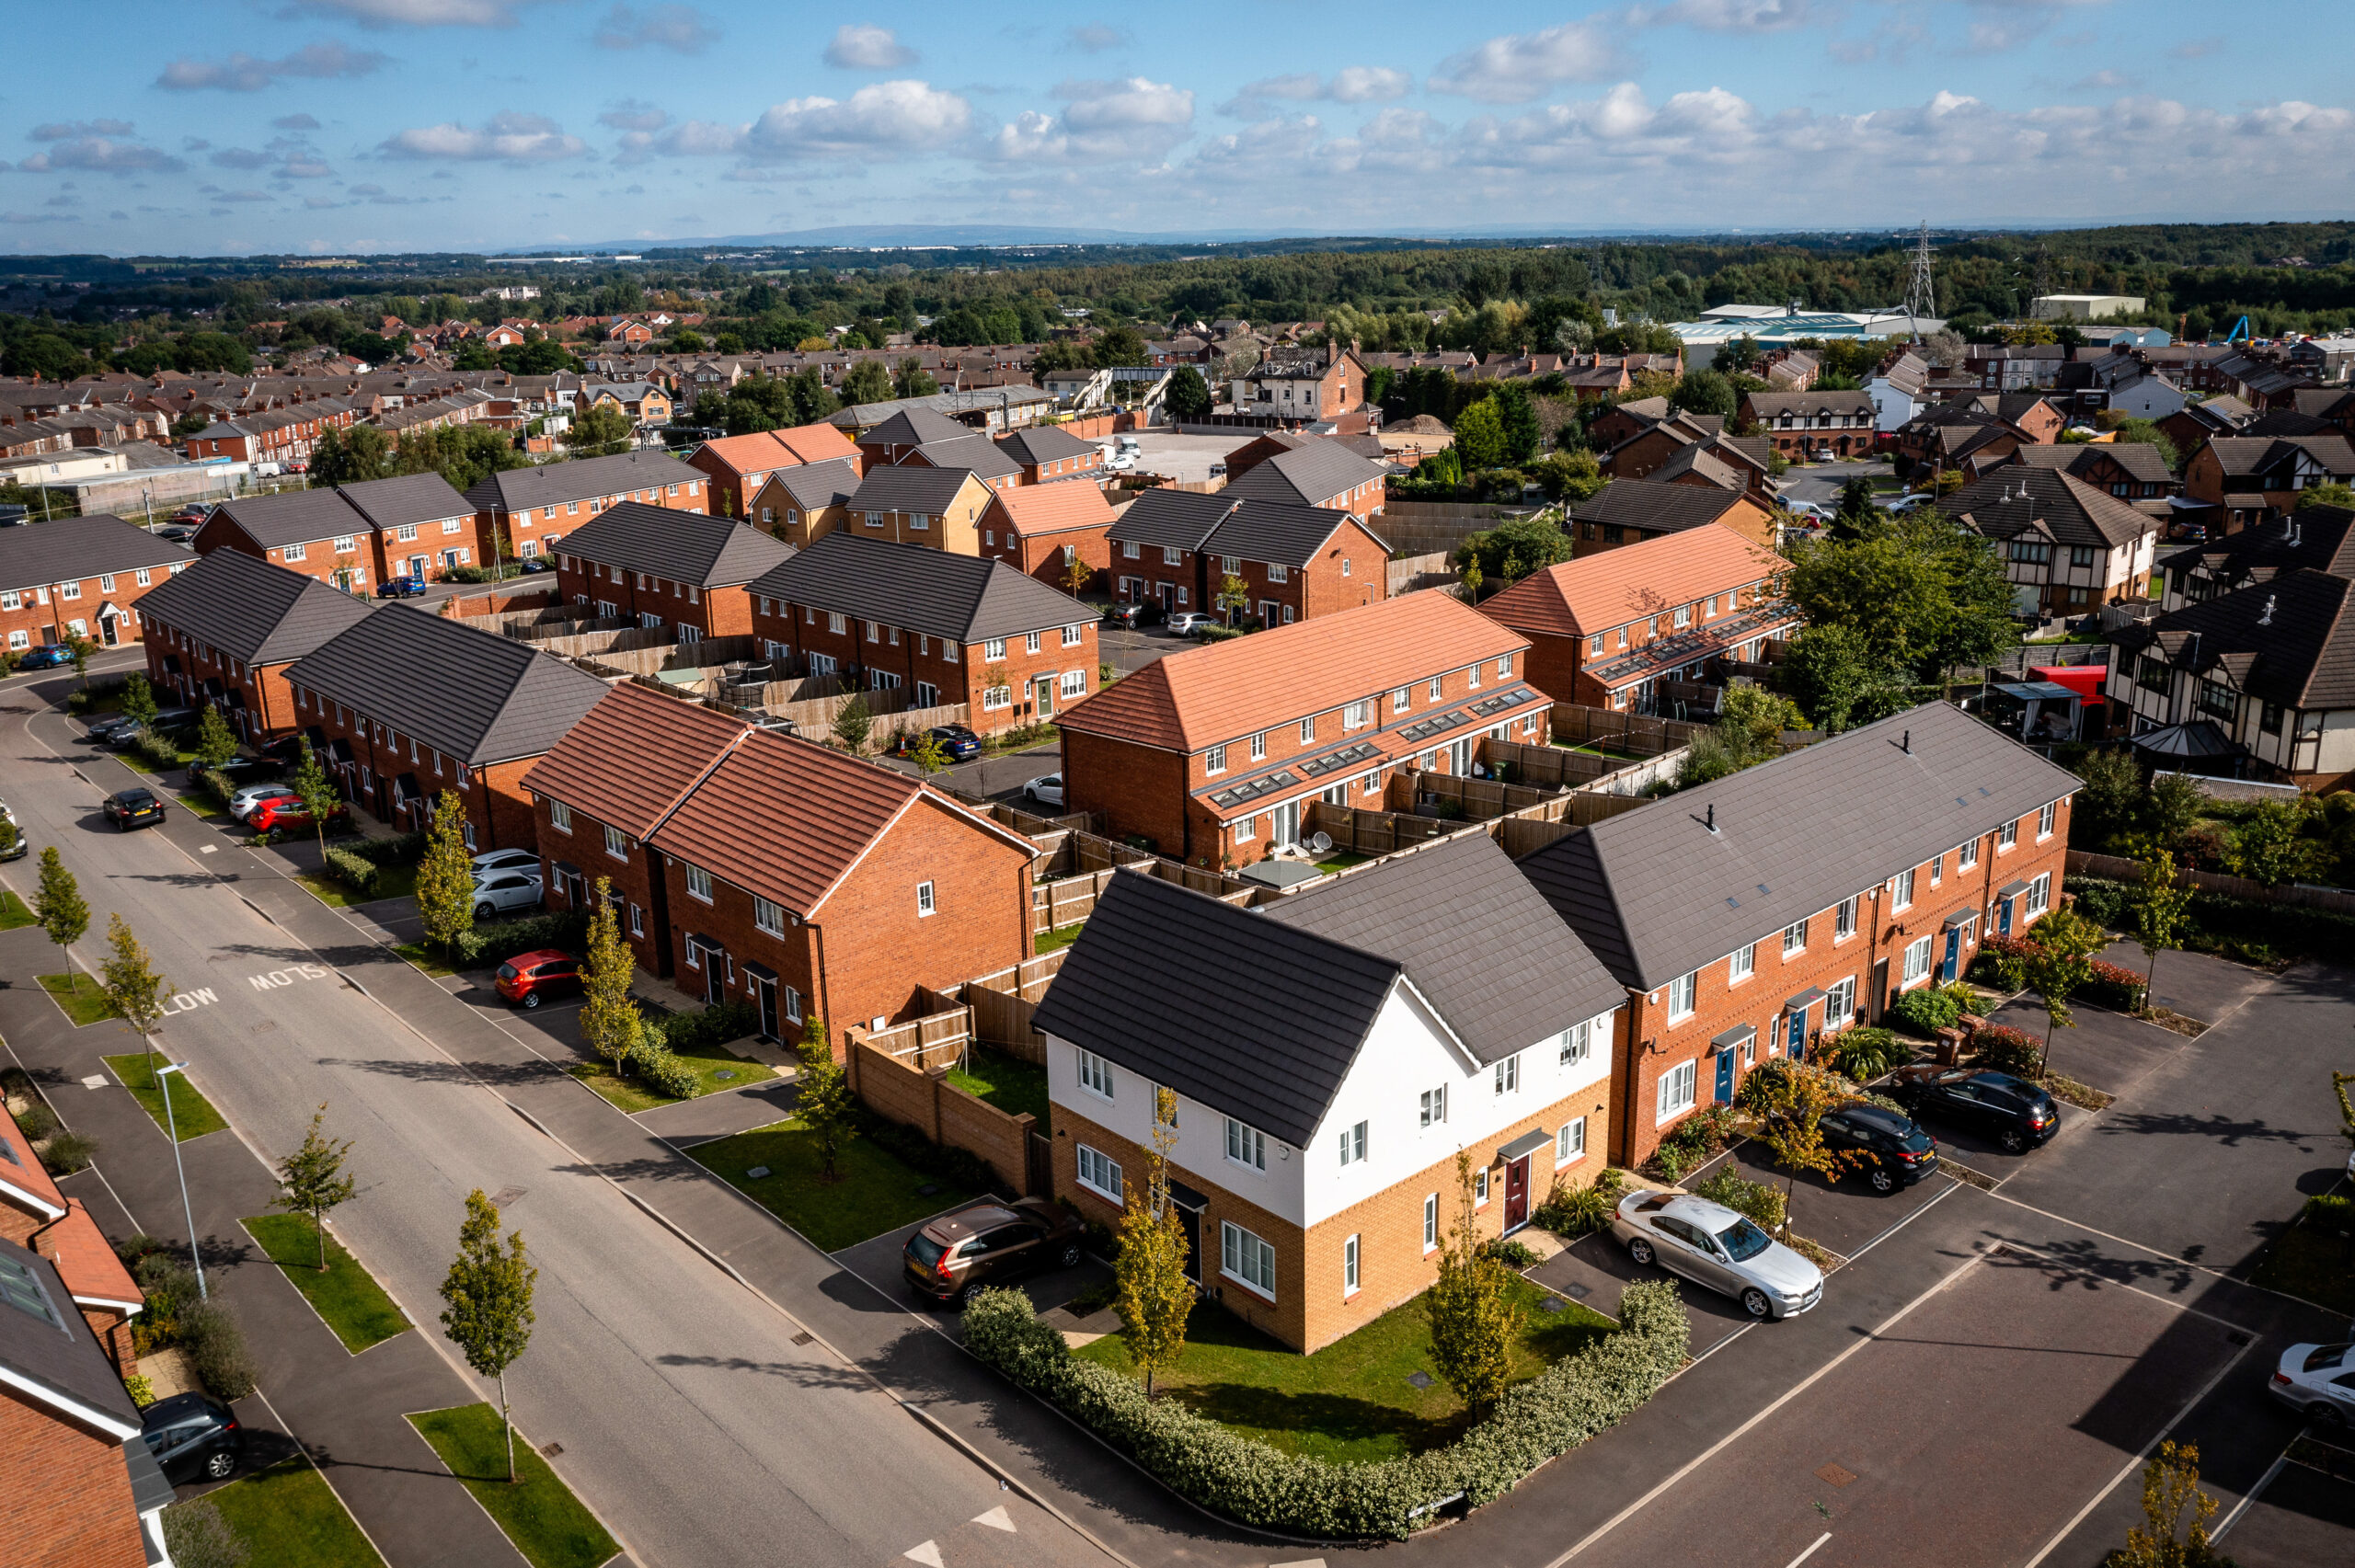 New Homes, Abbotsfield, St Helens, Aerial Shot